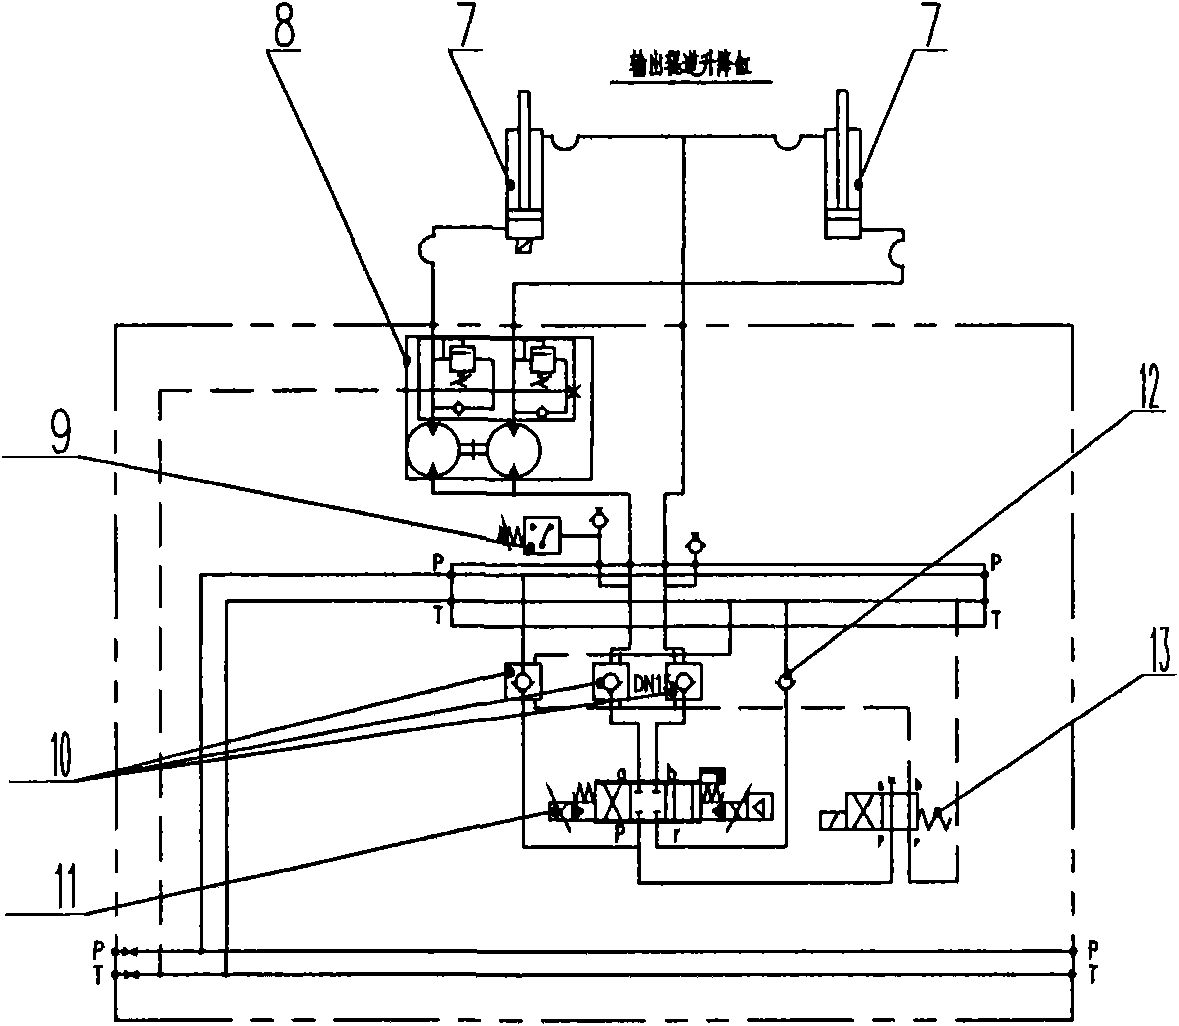 Roller-lifting proportional and synchronous hydraulic control system